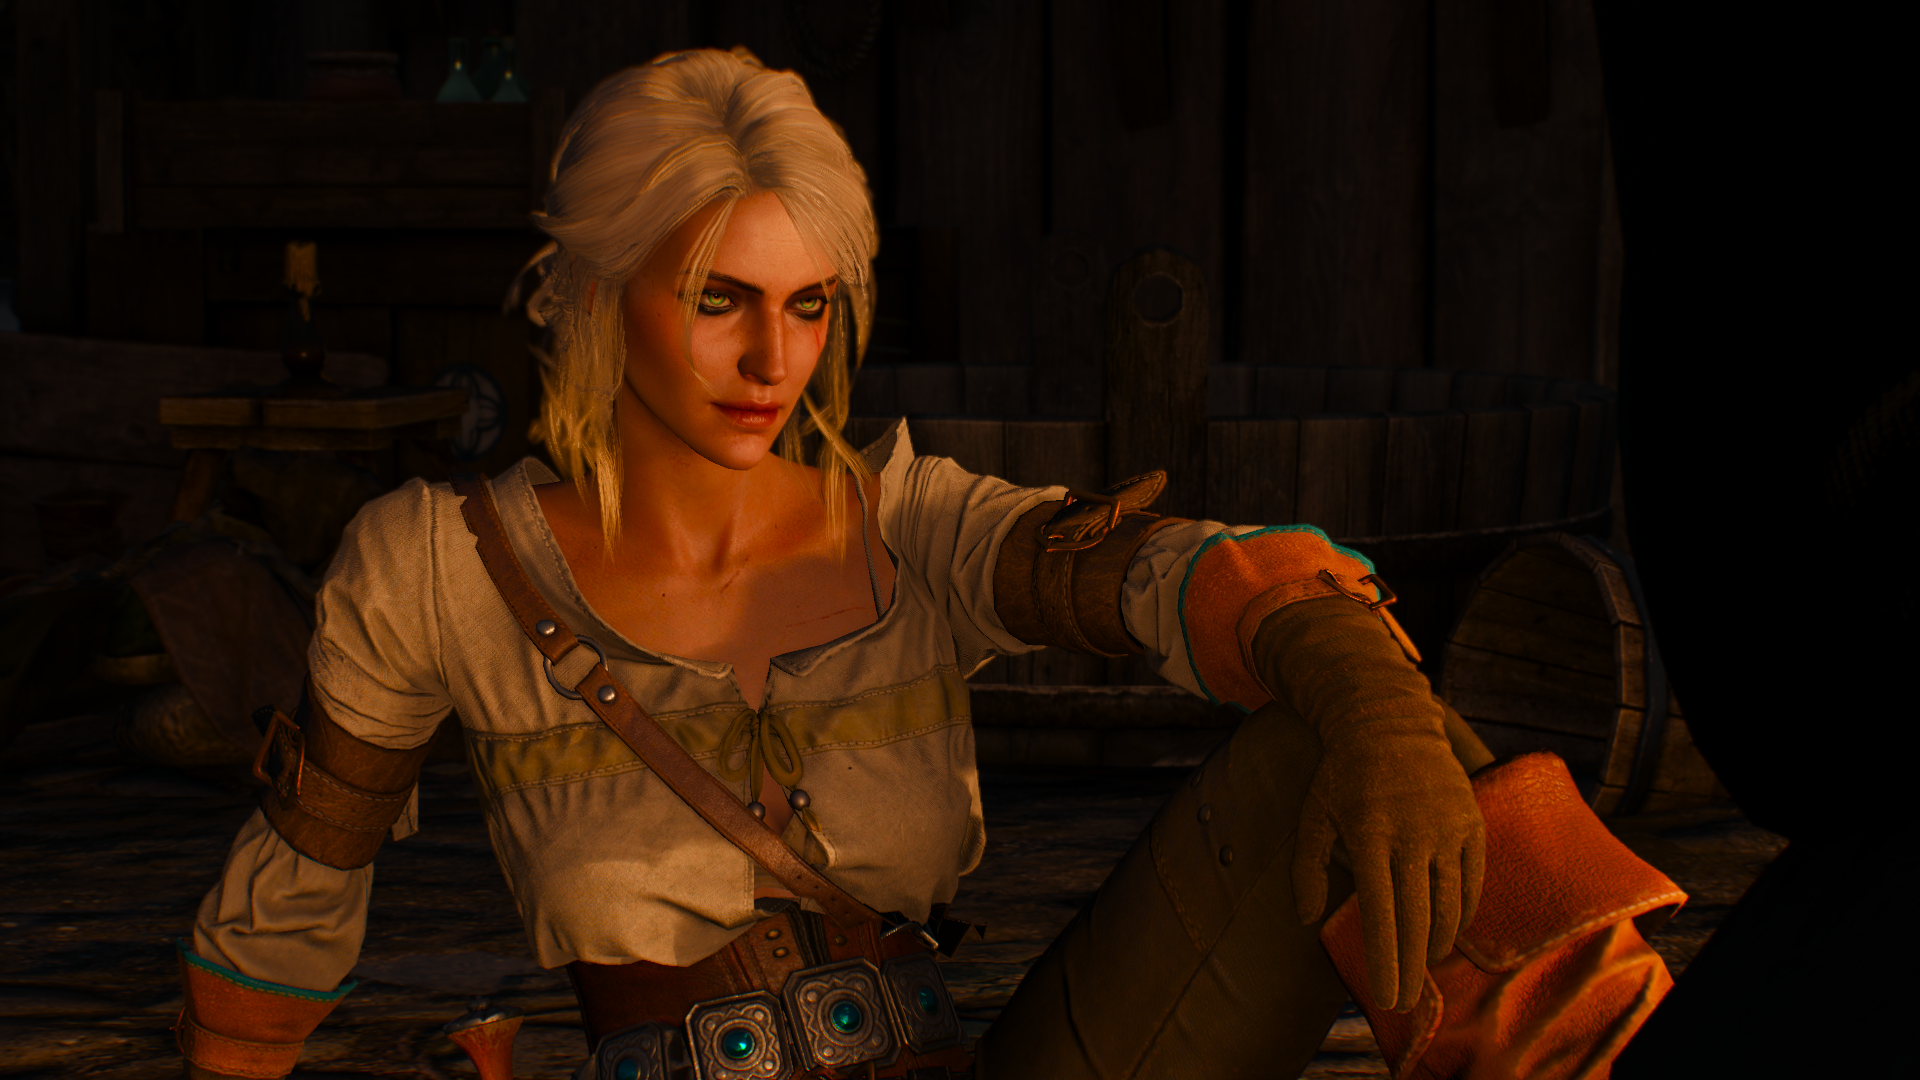 General 1920x1080 The Witcher 3: Wild Hunt Cirilla Fiona Elen Riannon screen shot video game characters